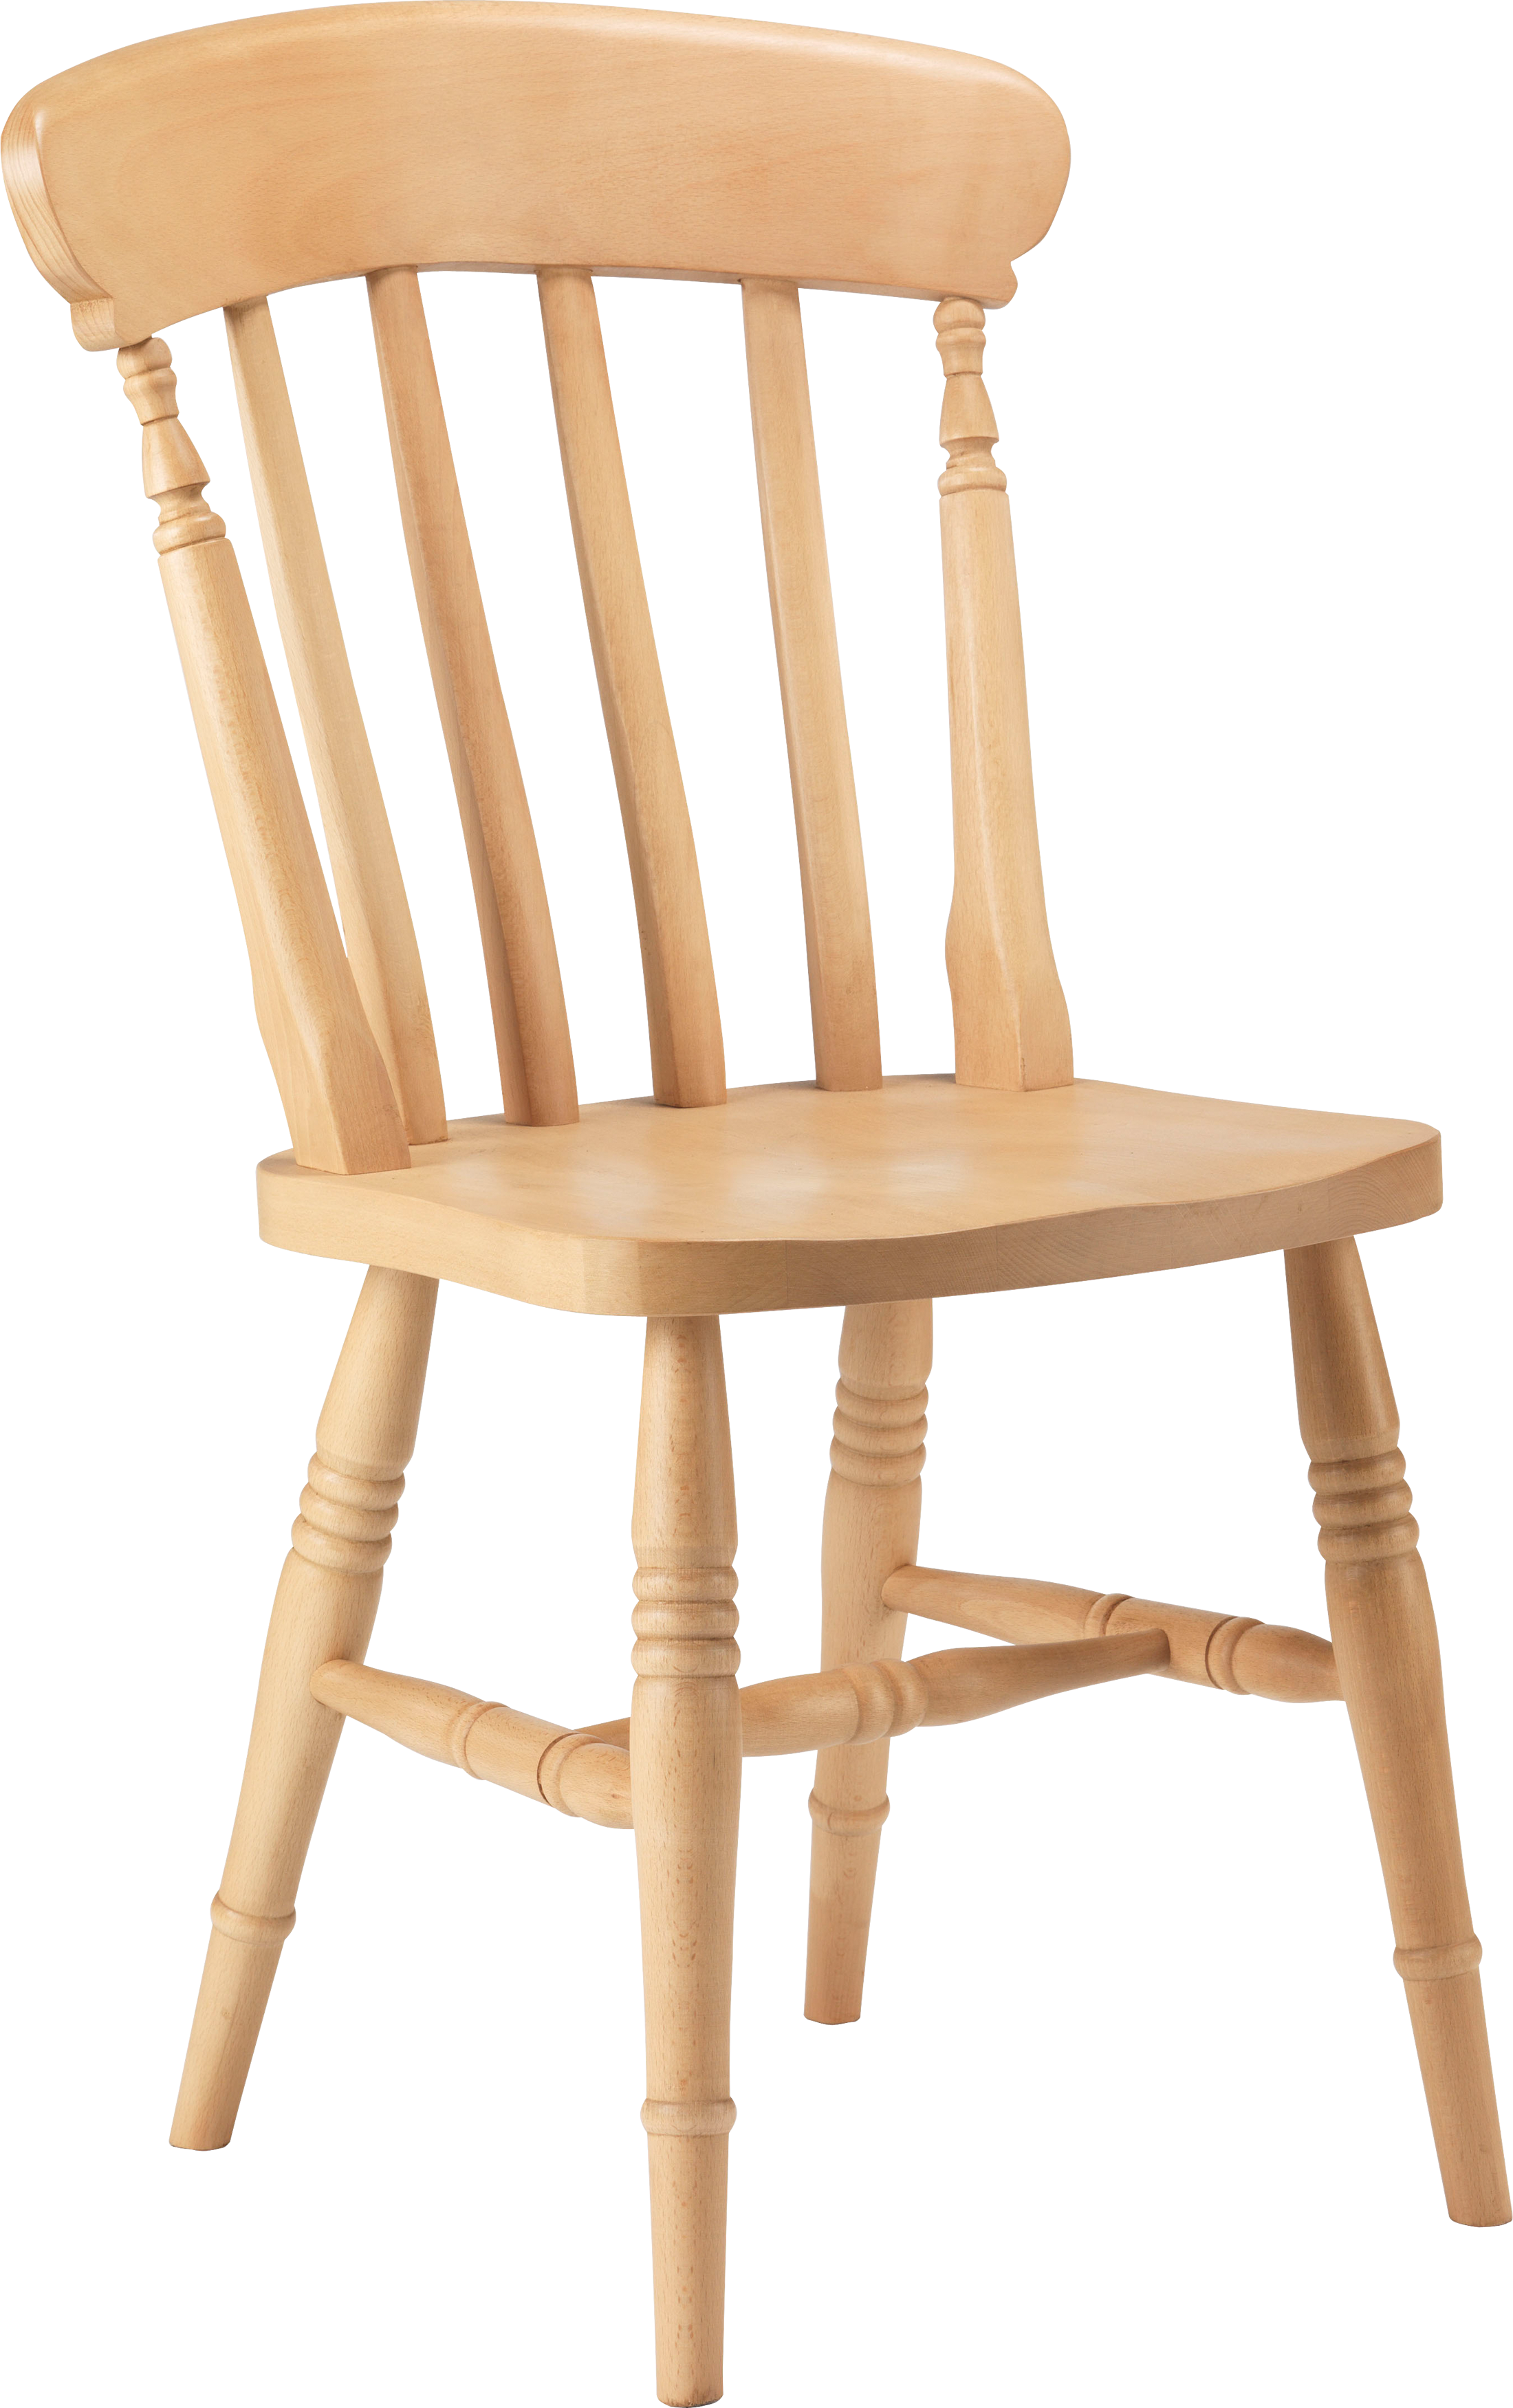 Chair Free Download Png PNG Image